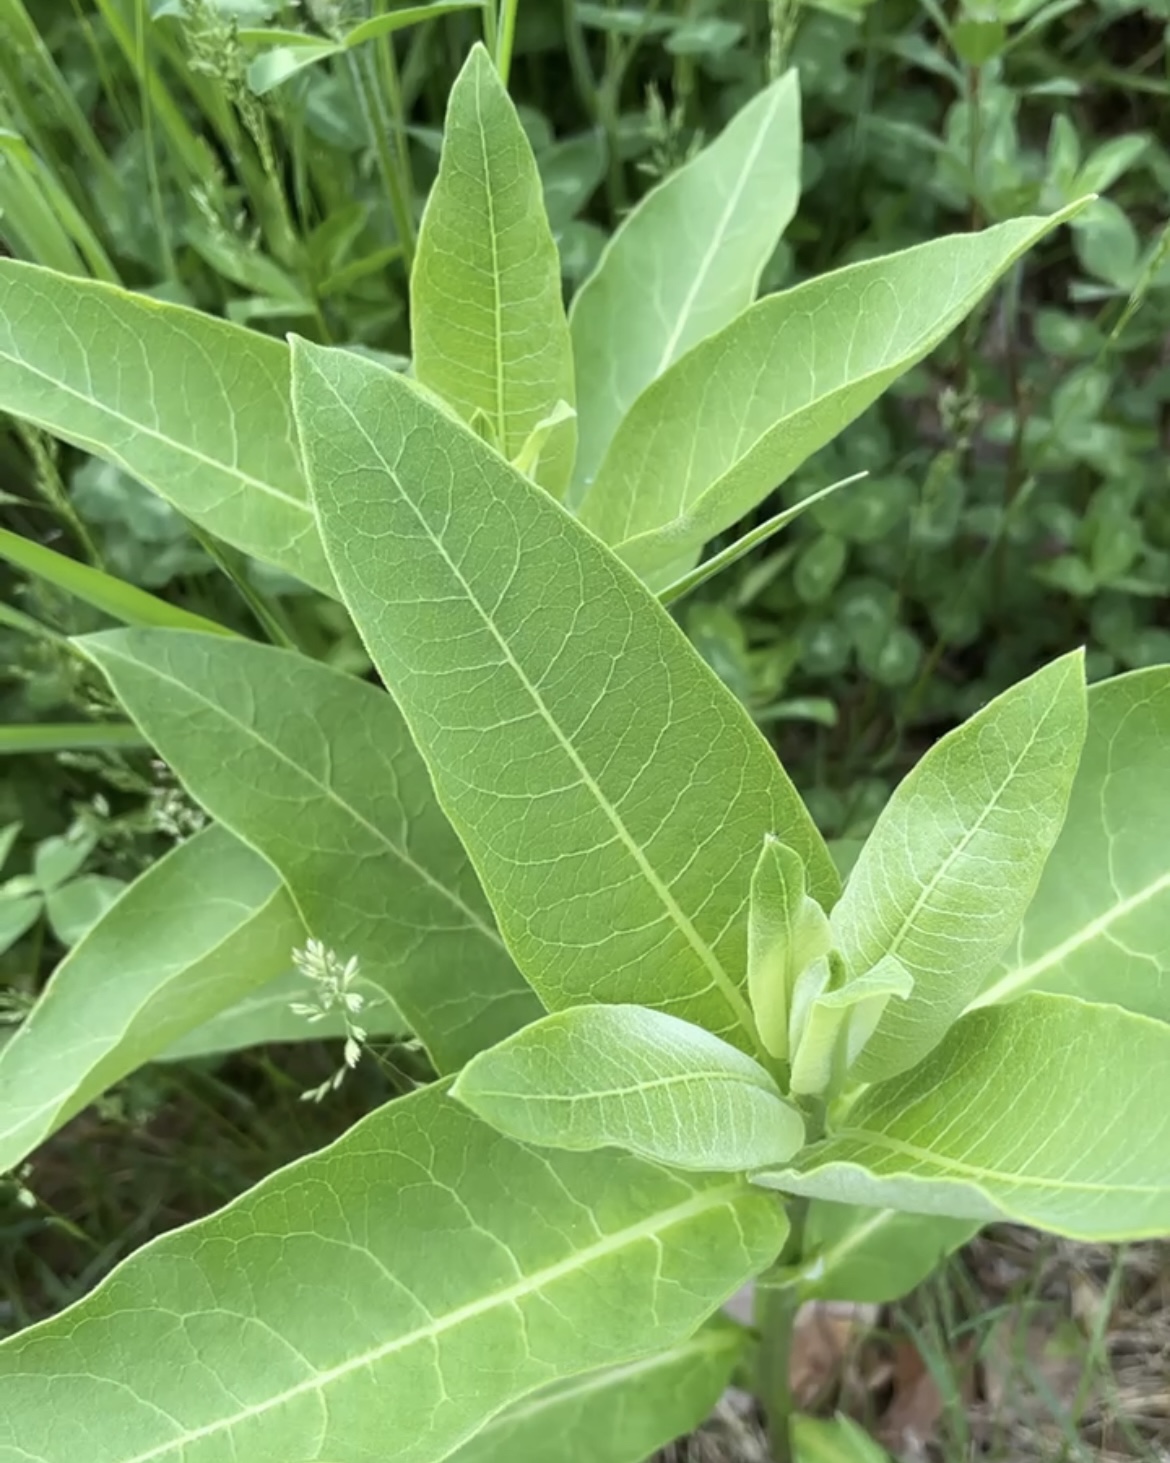 Milkweed plants that have yet to flower.